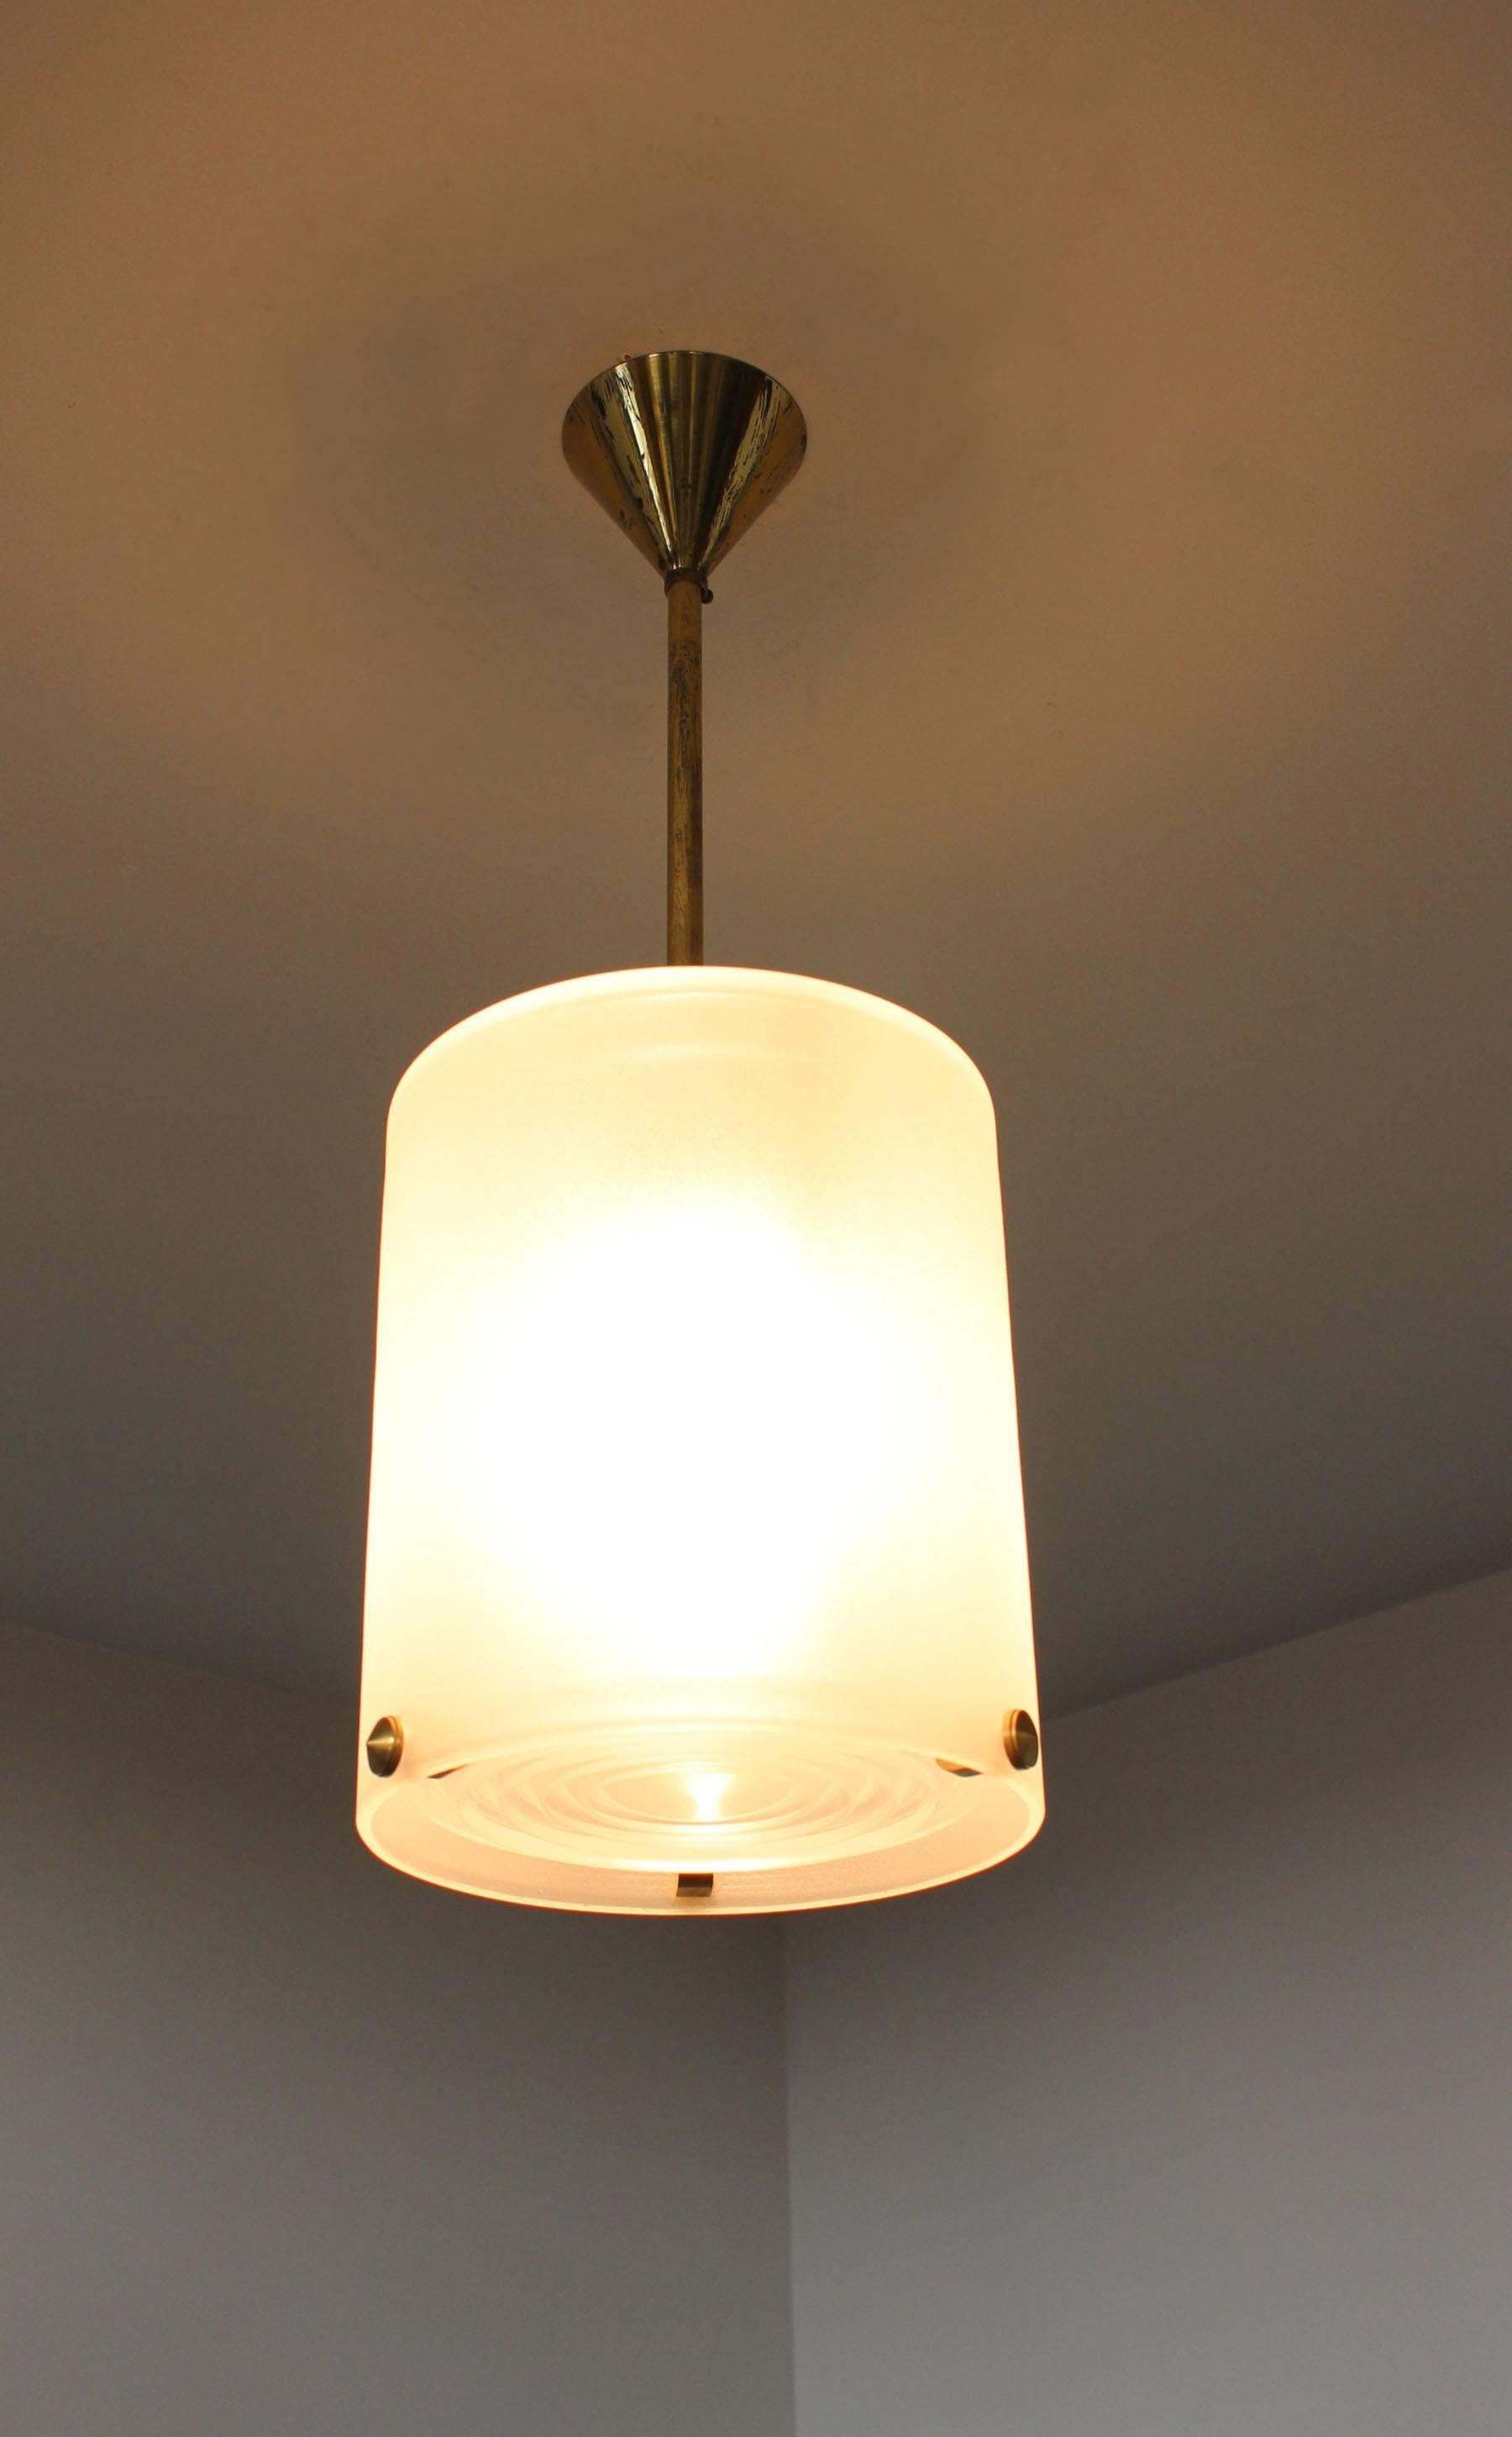 A fine French Art Deco pendants by Jean Perzel with a frosted glass cylinder shade and three bronze studs that support a prismatic glass lens, the rod and canopy are bronze as well. 
